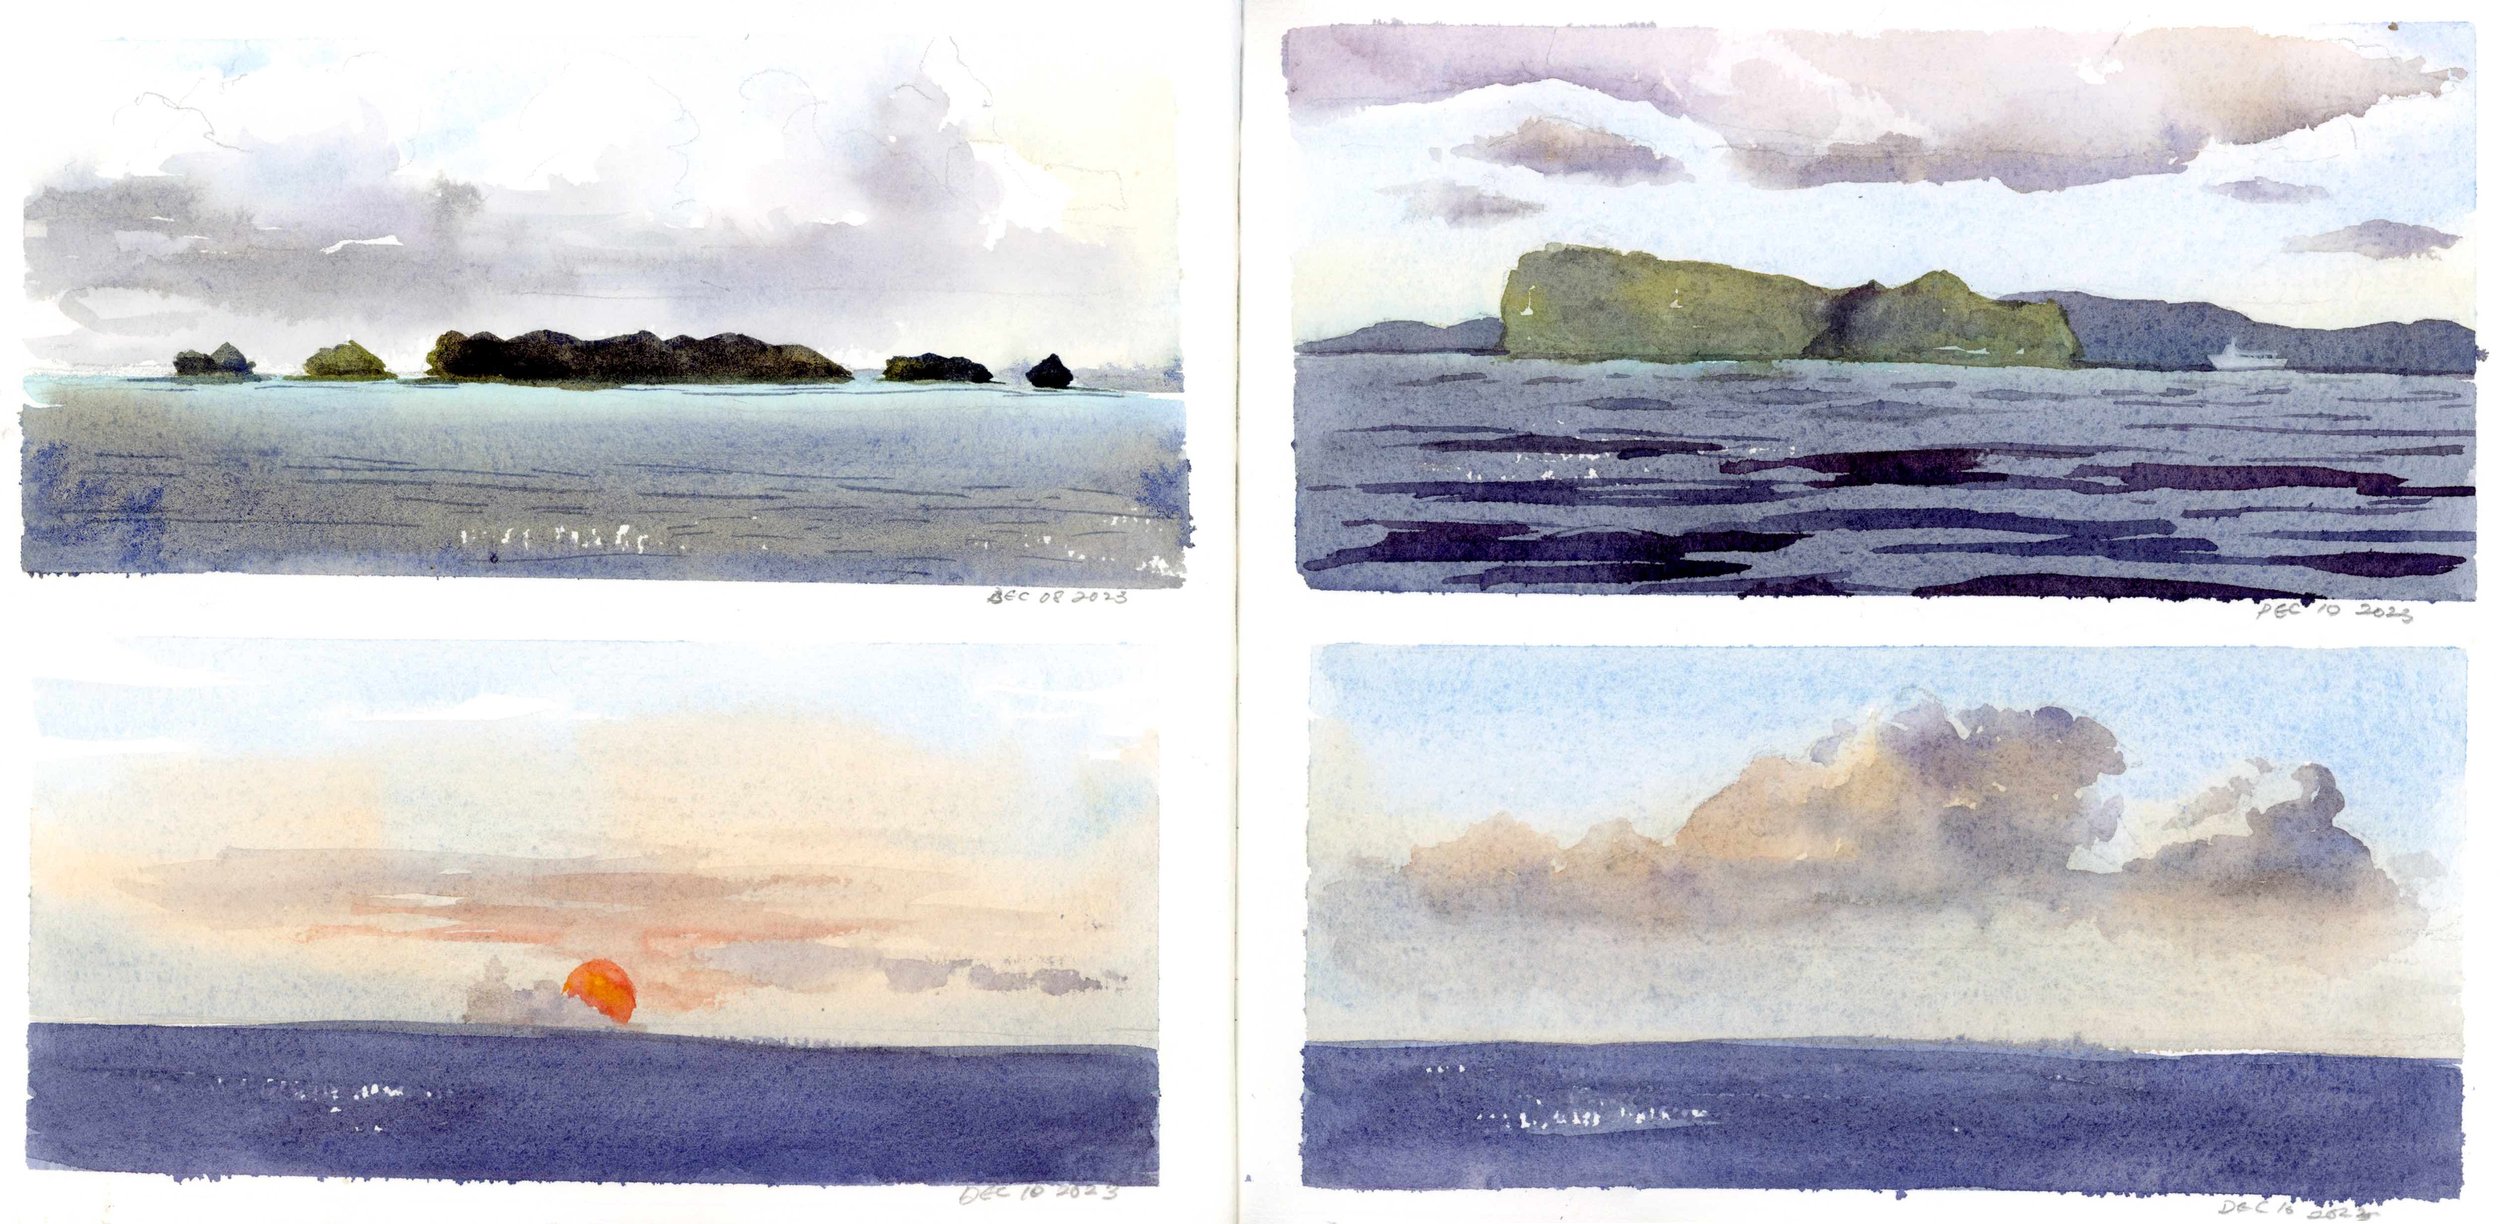  Color studies of the island and its captivating cloud formations. 